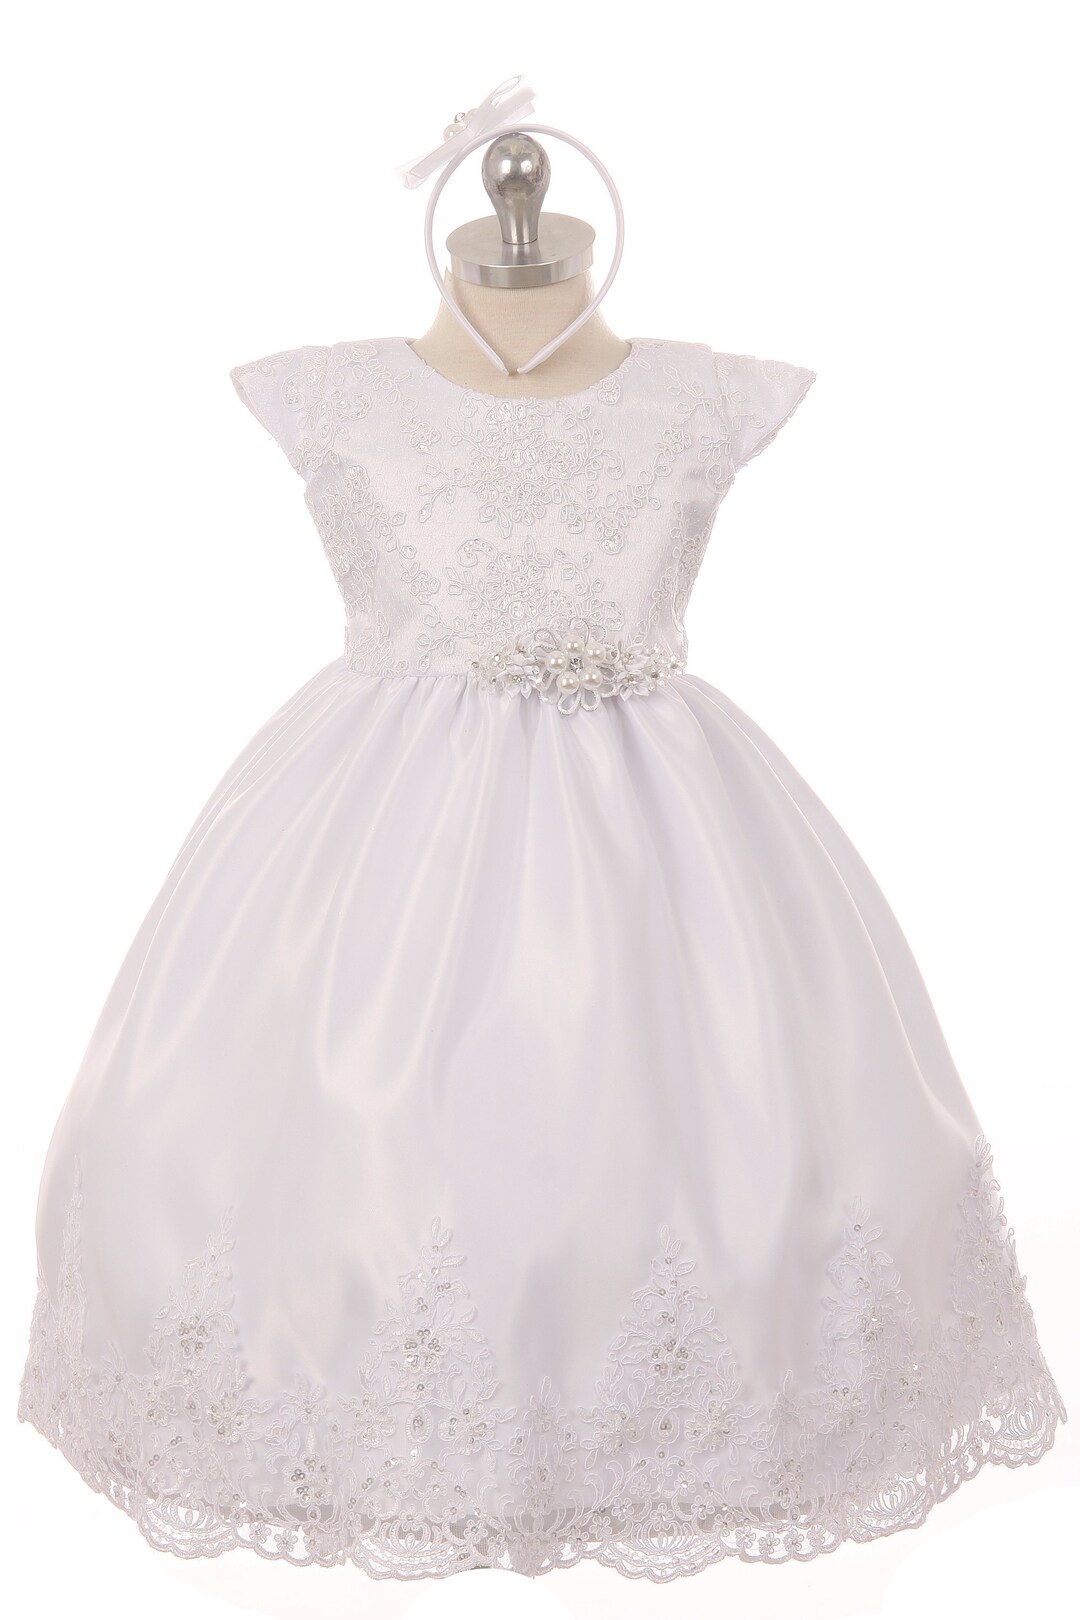 Baptism Dress With Hand Beaded Allover Lace Appliqué Bodice. - Etsy